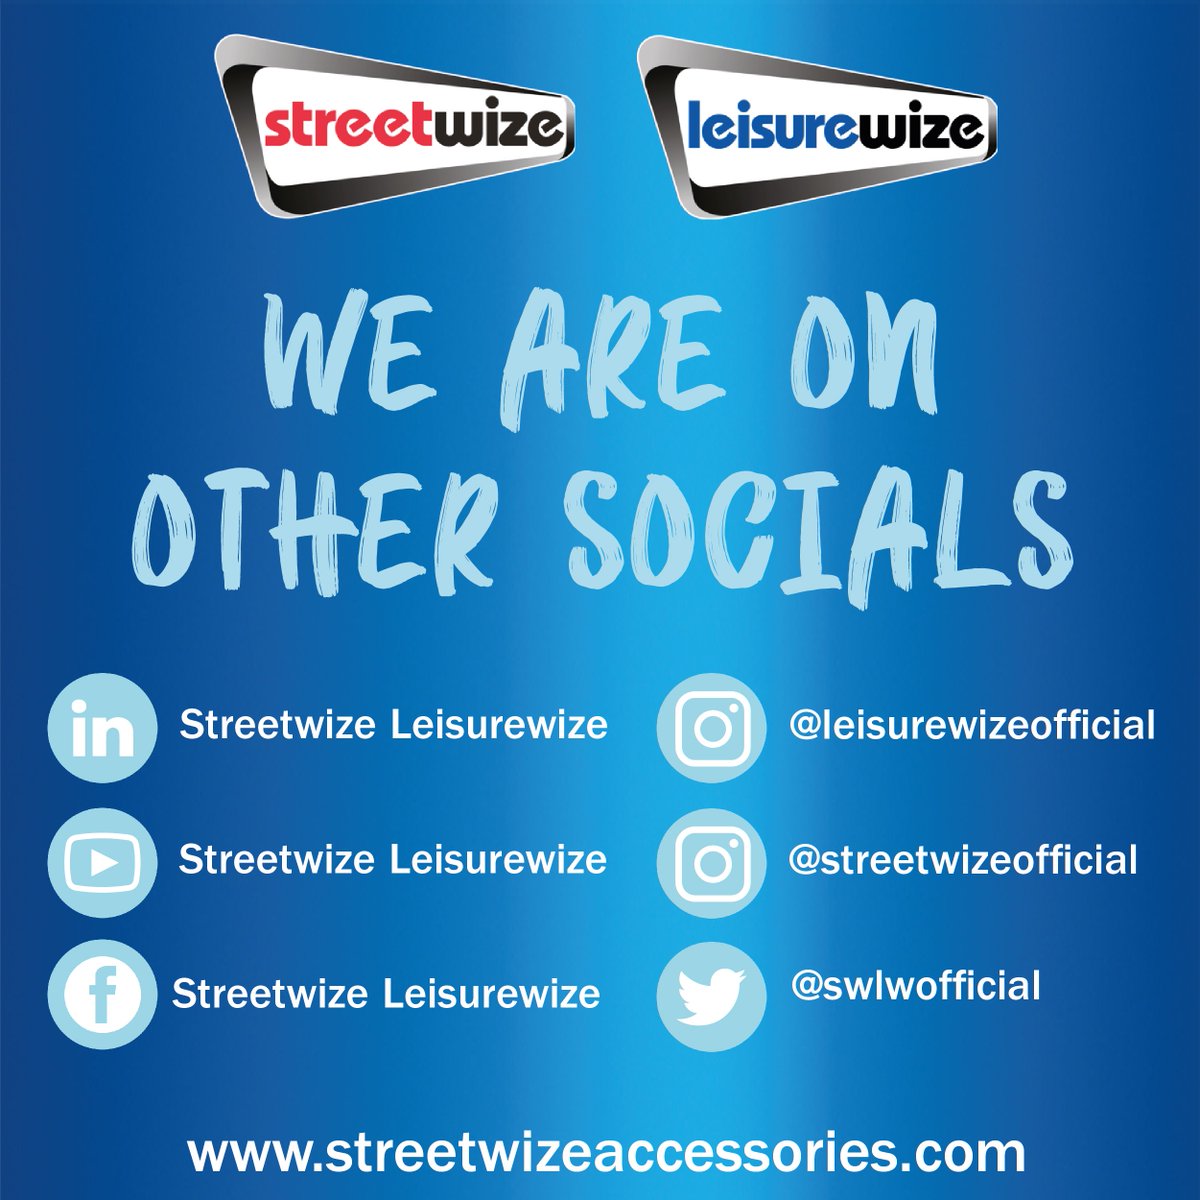 Join our community! subscribe to all of our socials for the latest updates, deals, news and product ranges. 

Have a great Sunday 👍

#streetwize #leisurewize #b2b #suppliers #traffordpark #manchester #wholesale #importexport #ukbrand #caraccessories #leisureaccessories #caravan